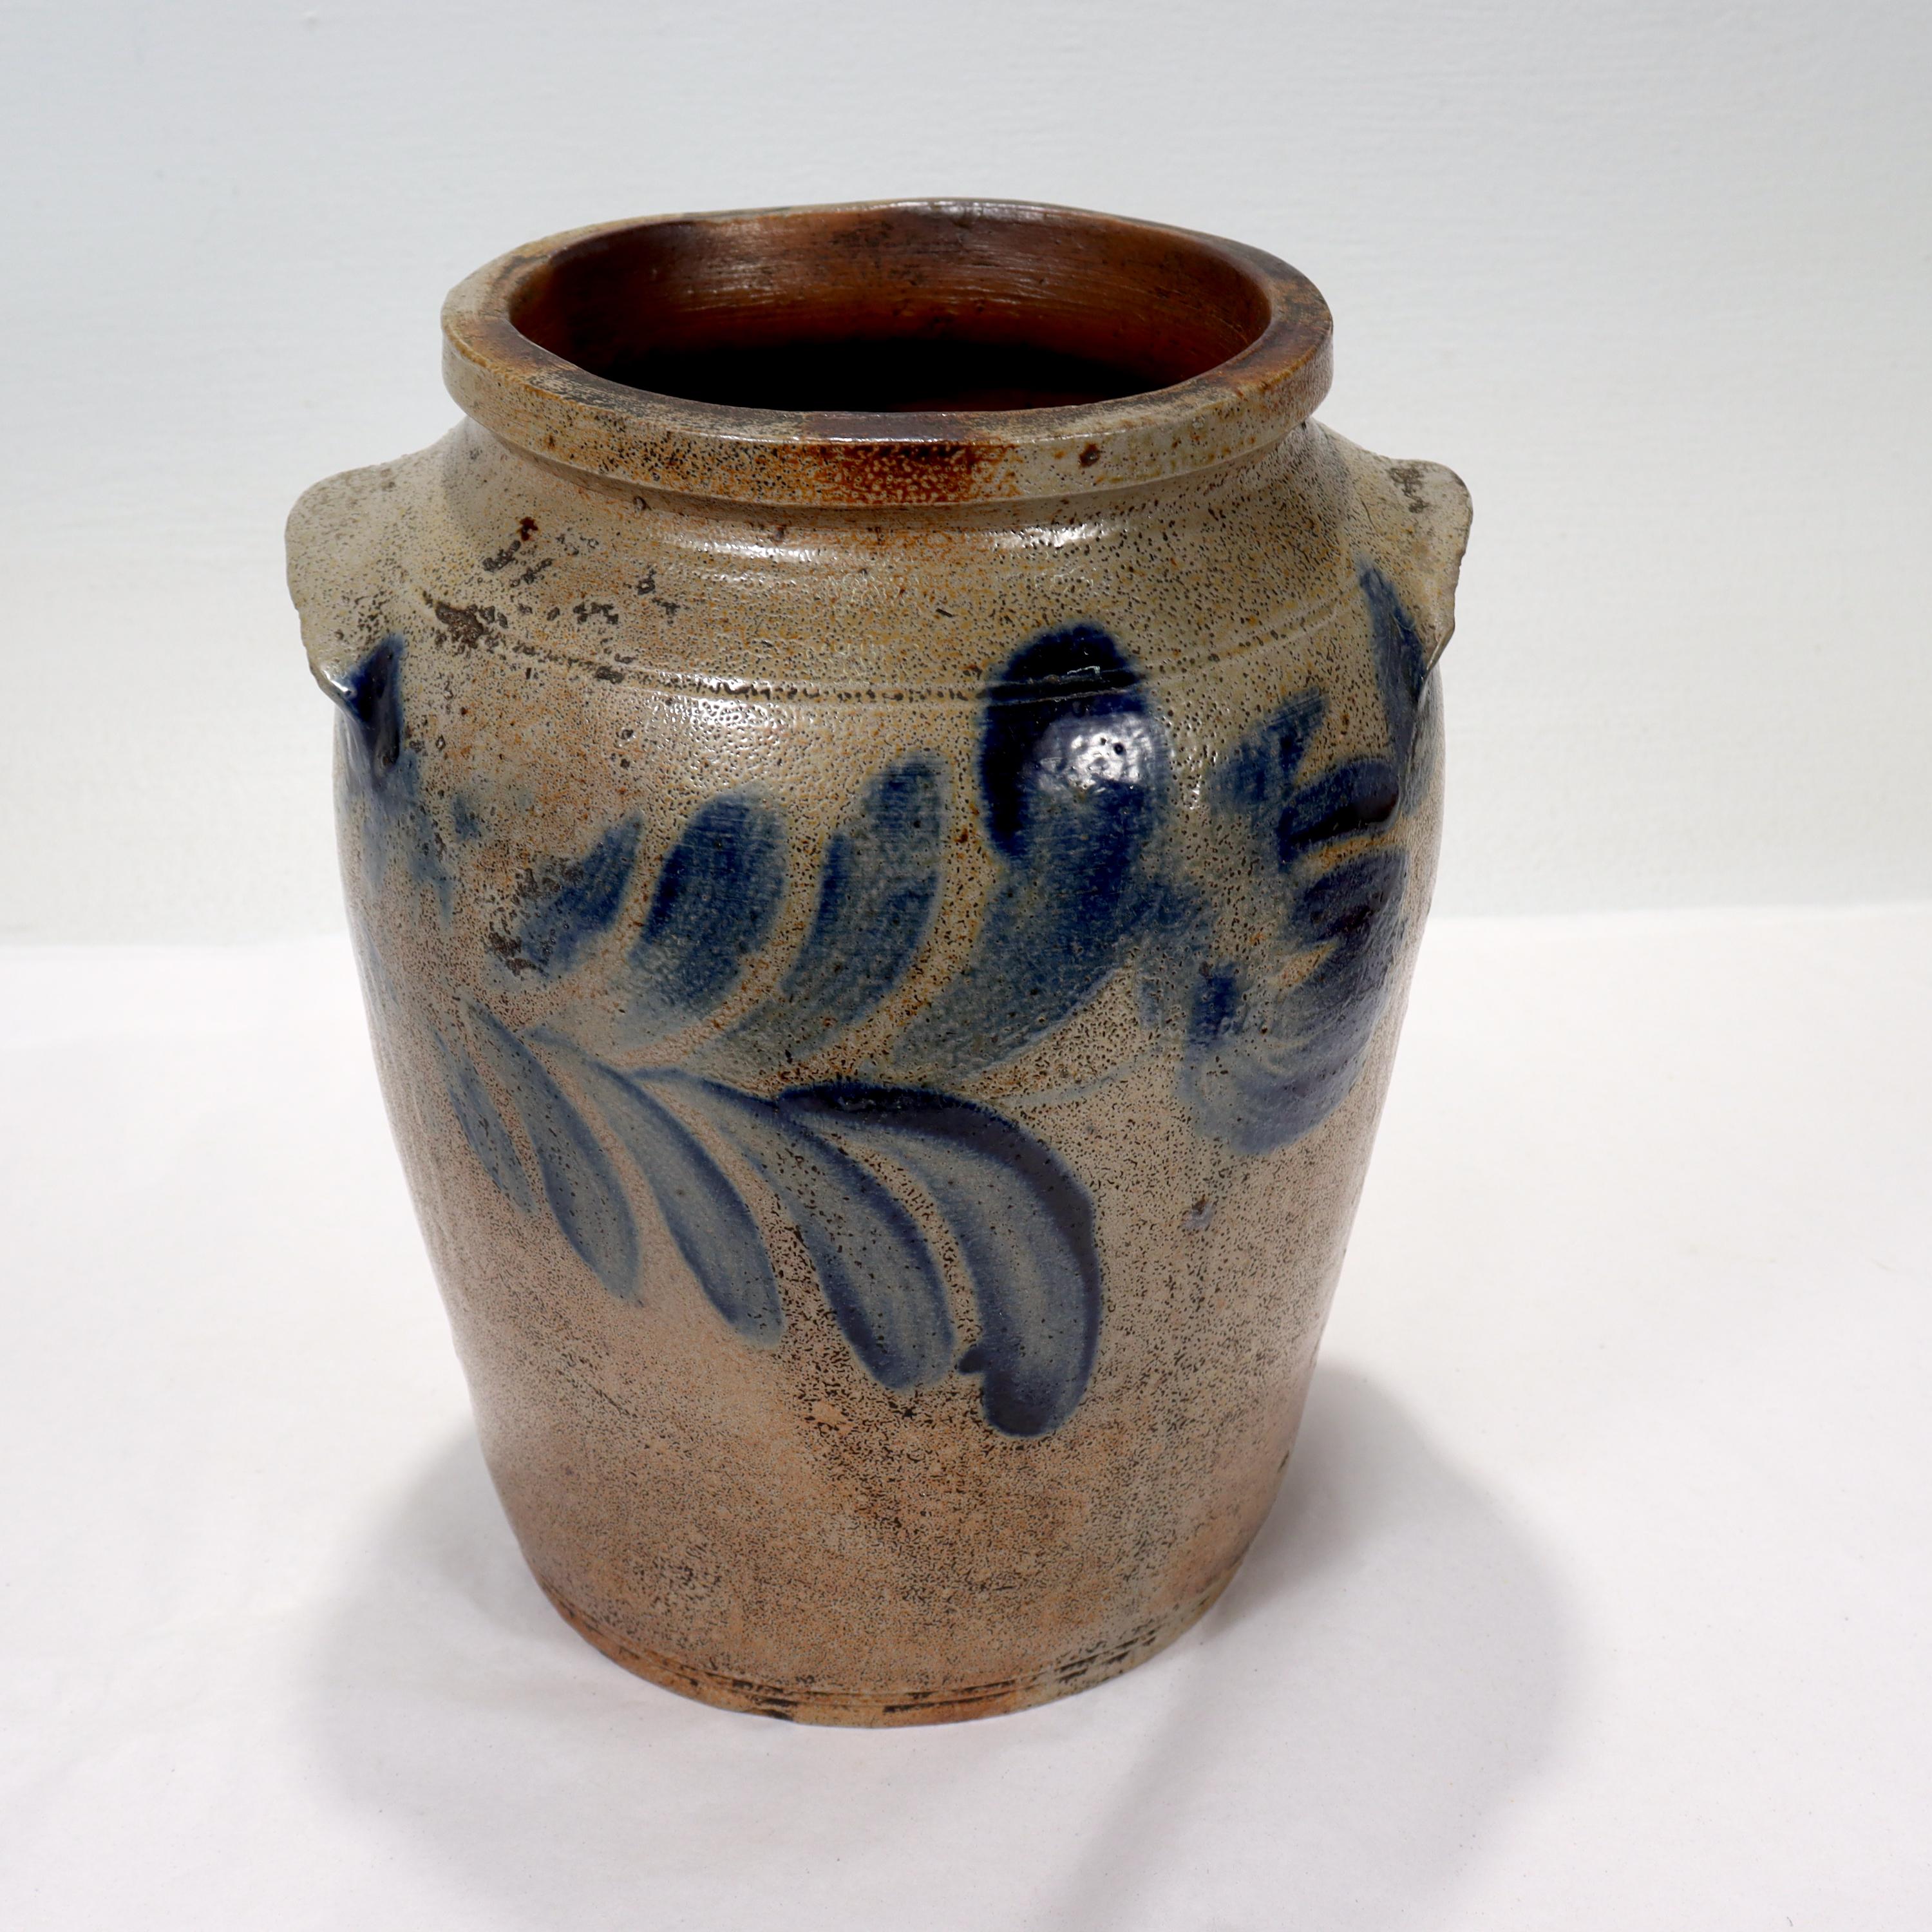 A fine antique blue decorated salt glaze stoneware crock.

With slightly tapered sides, twin handles, and blue underglaze stylized tulip decoration to both sides. 

Found in Maryland (possibly originating in Baltimore) and measuring